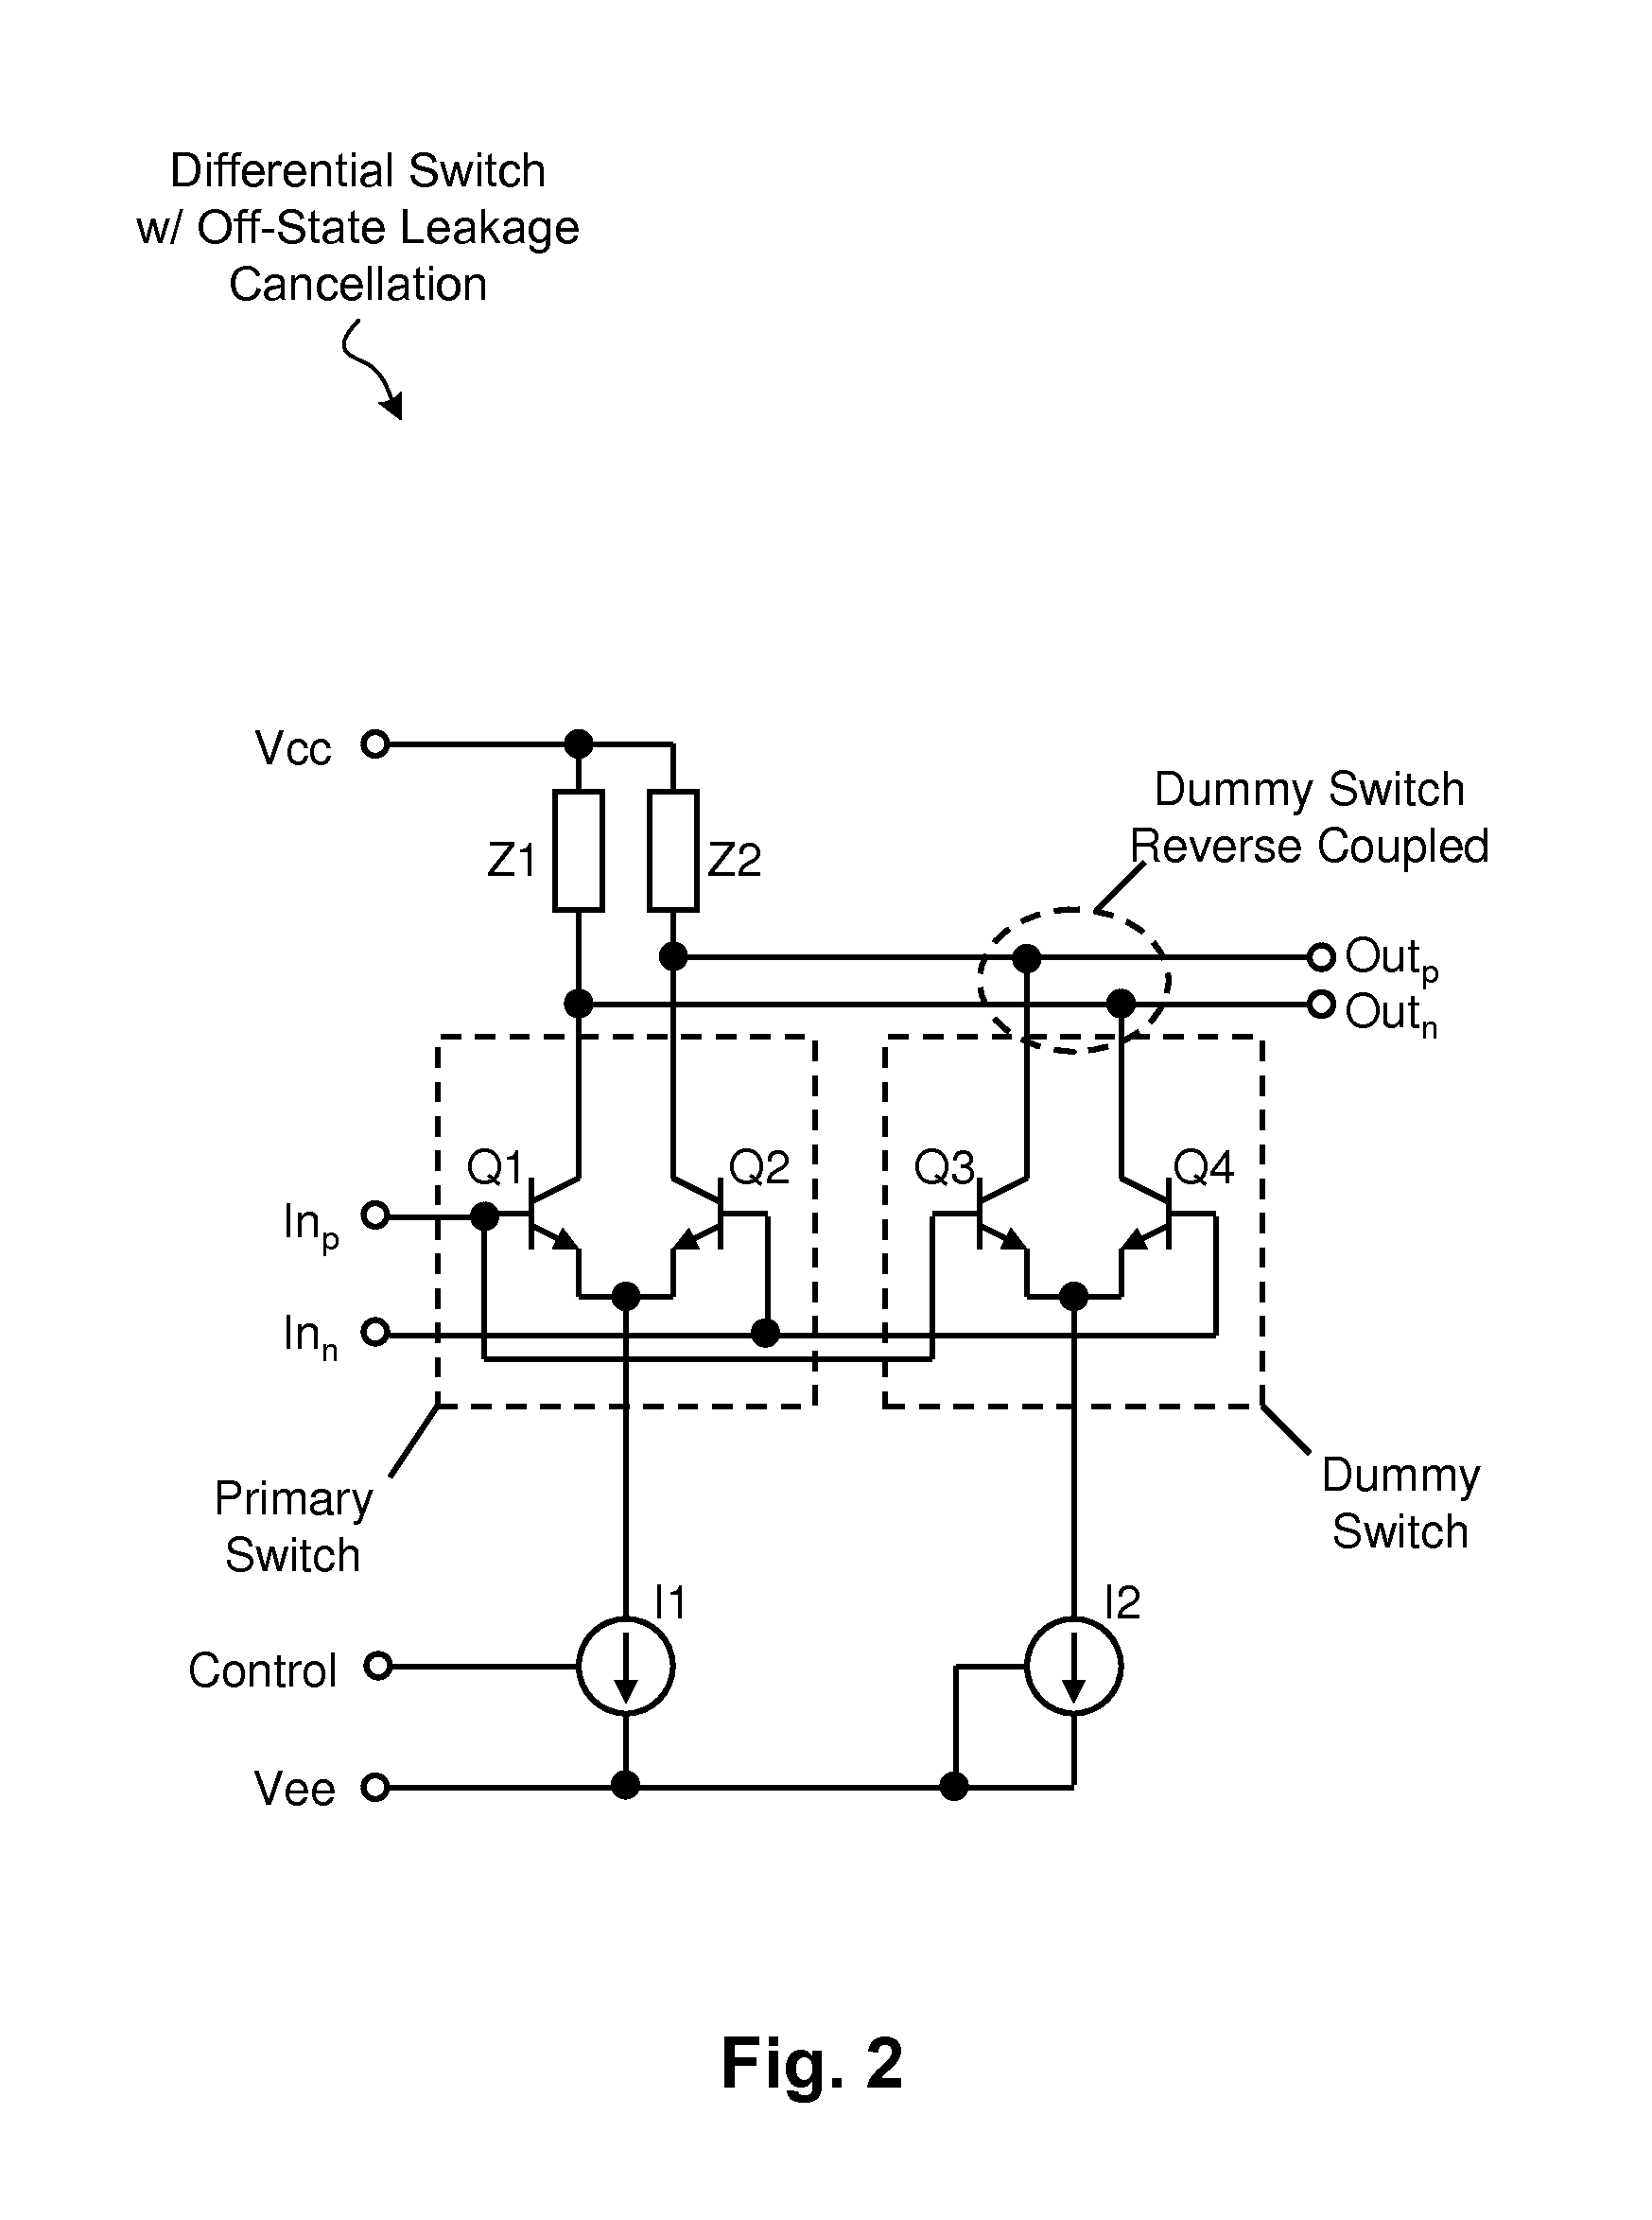 Differential switch with off-state isolation enhancement